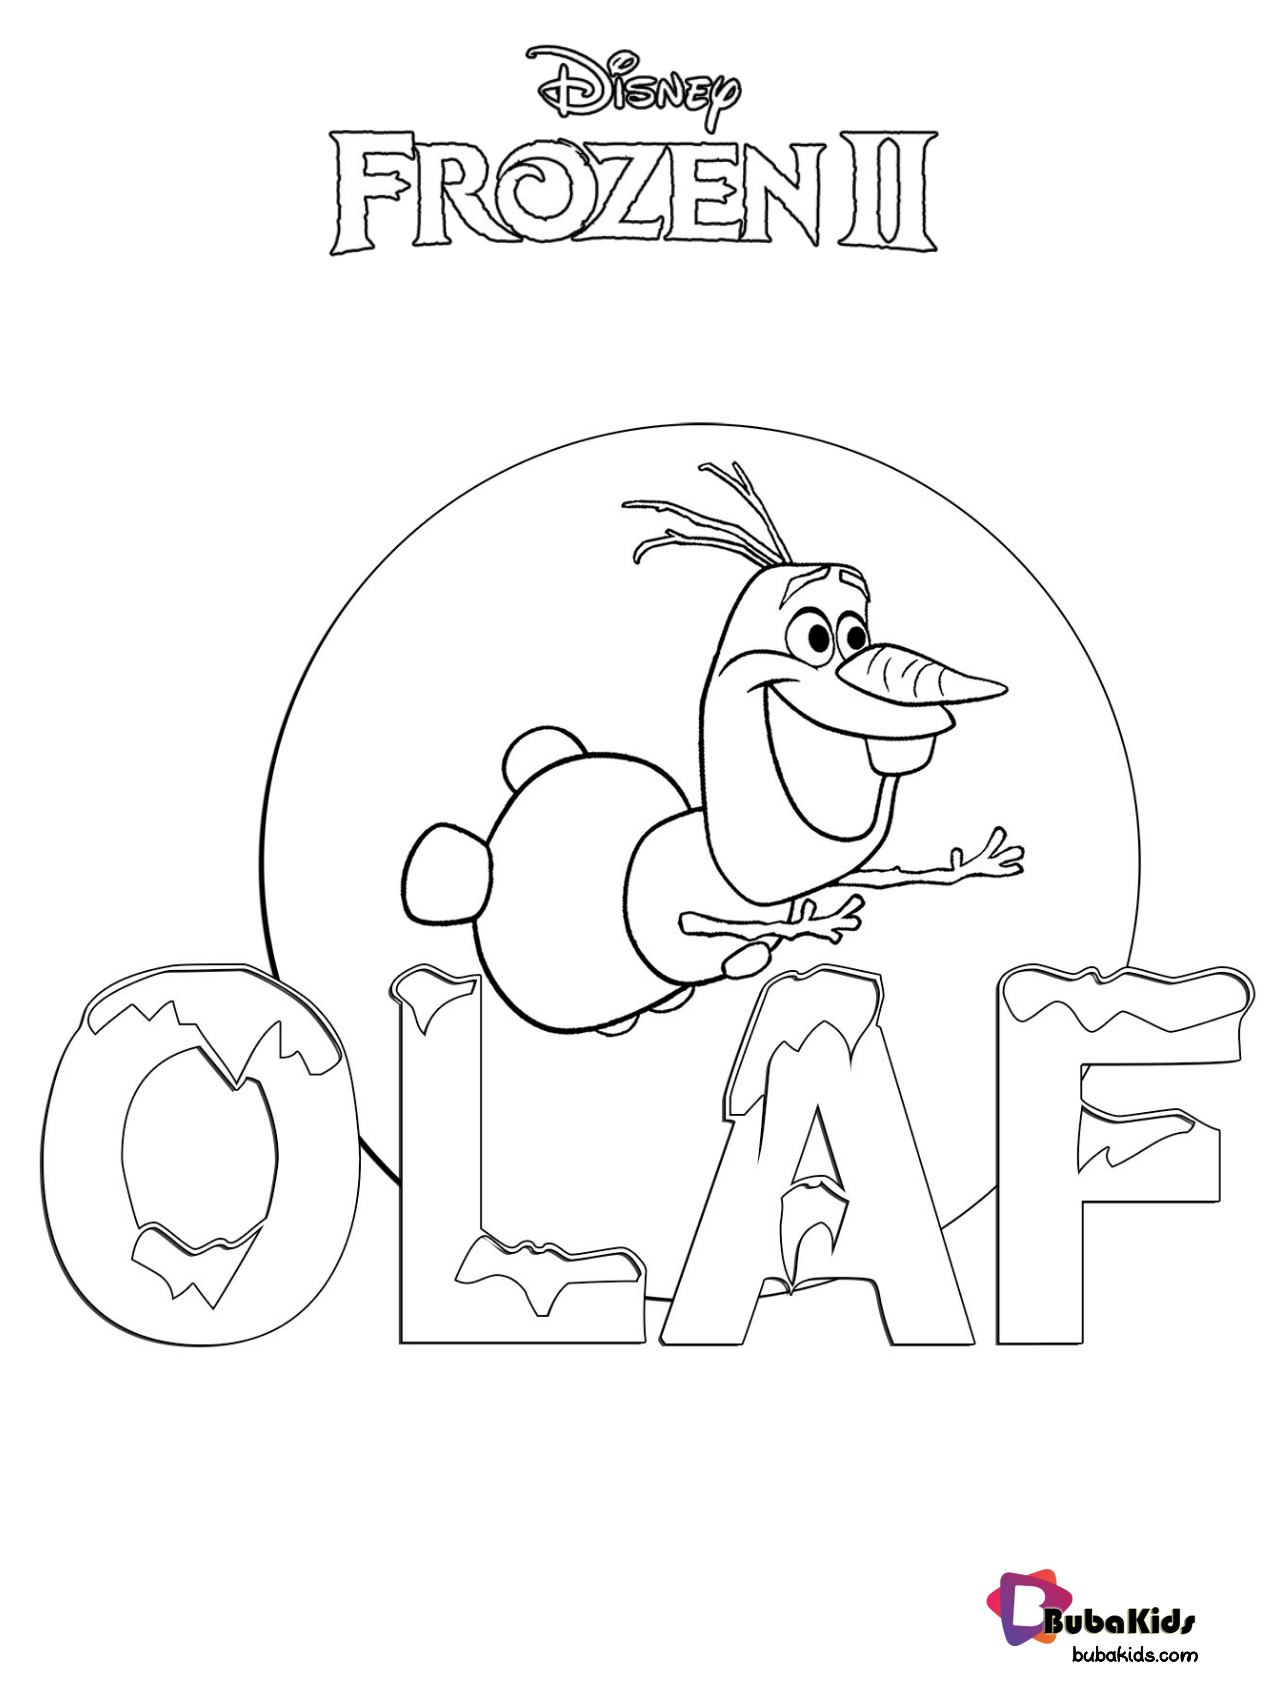 Frozen 2 Olaf the snowman coloring page.